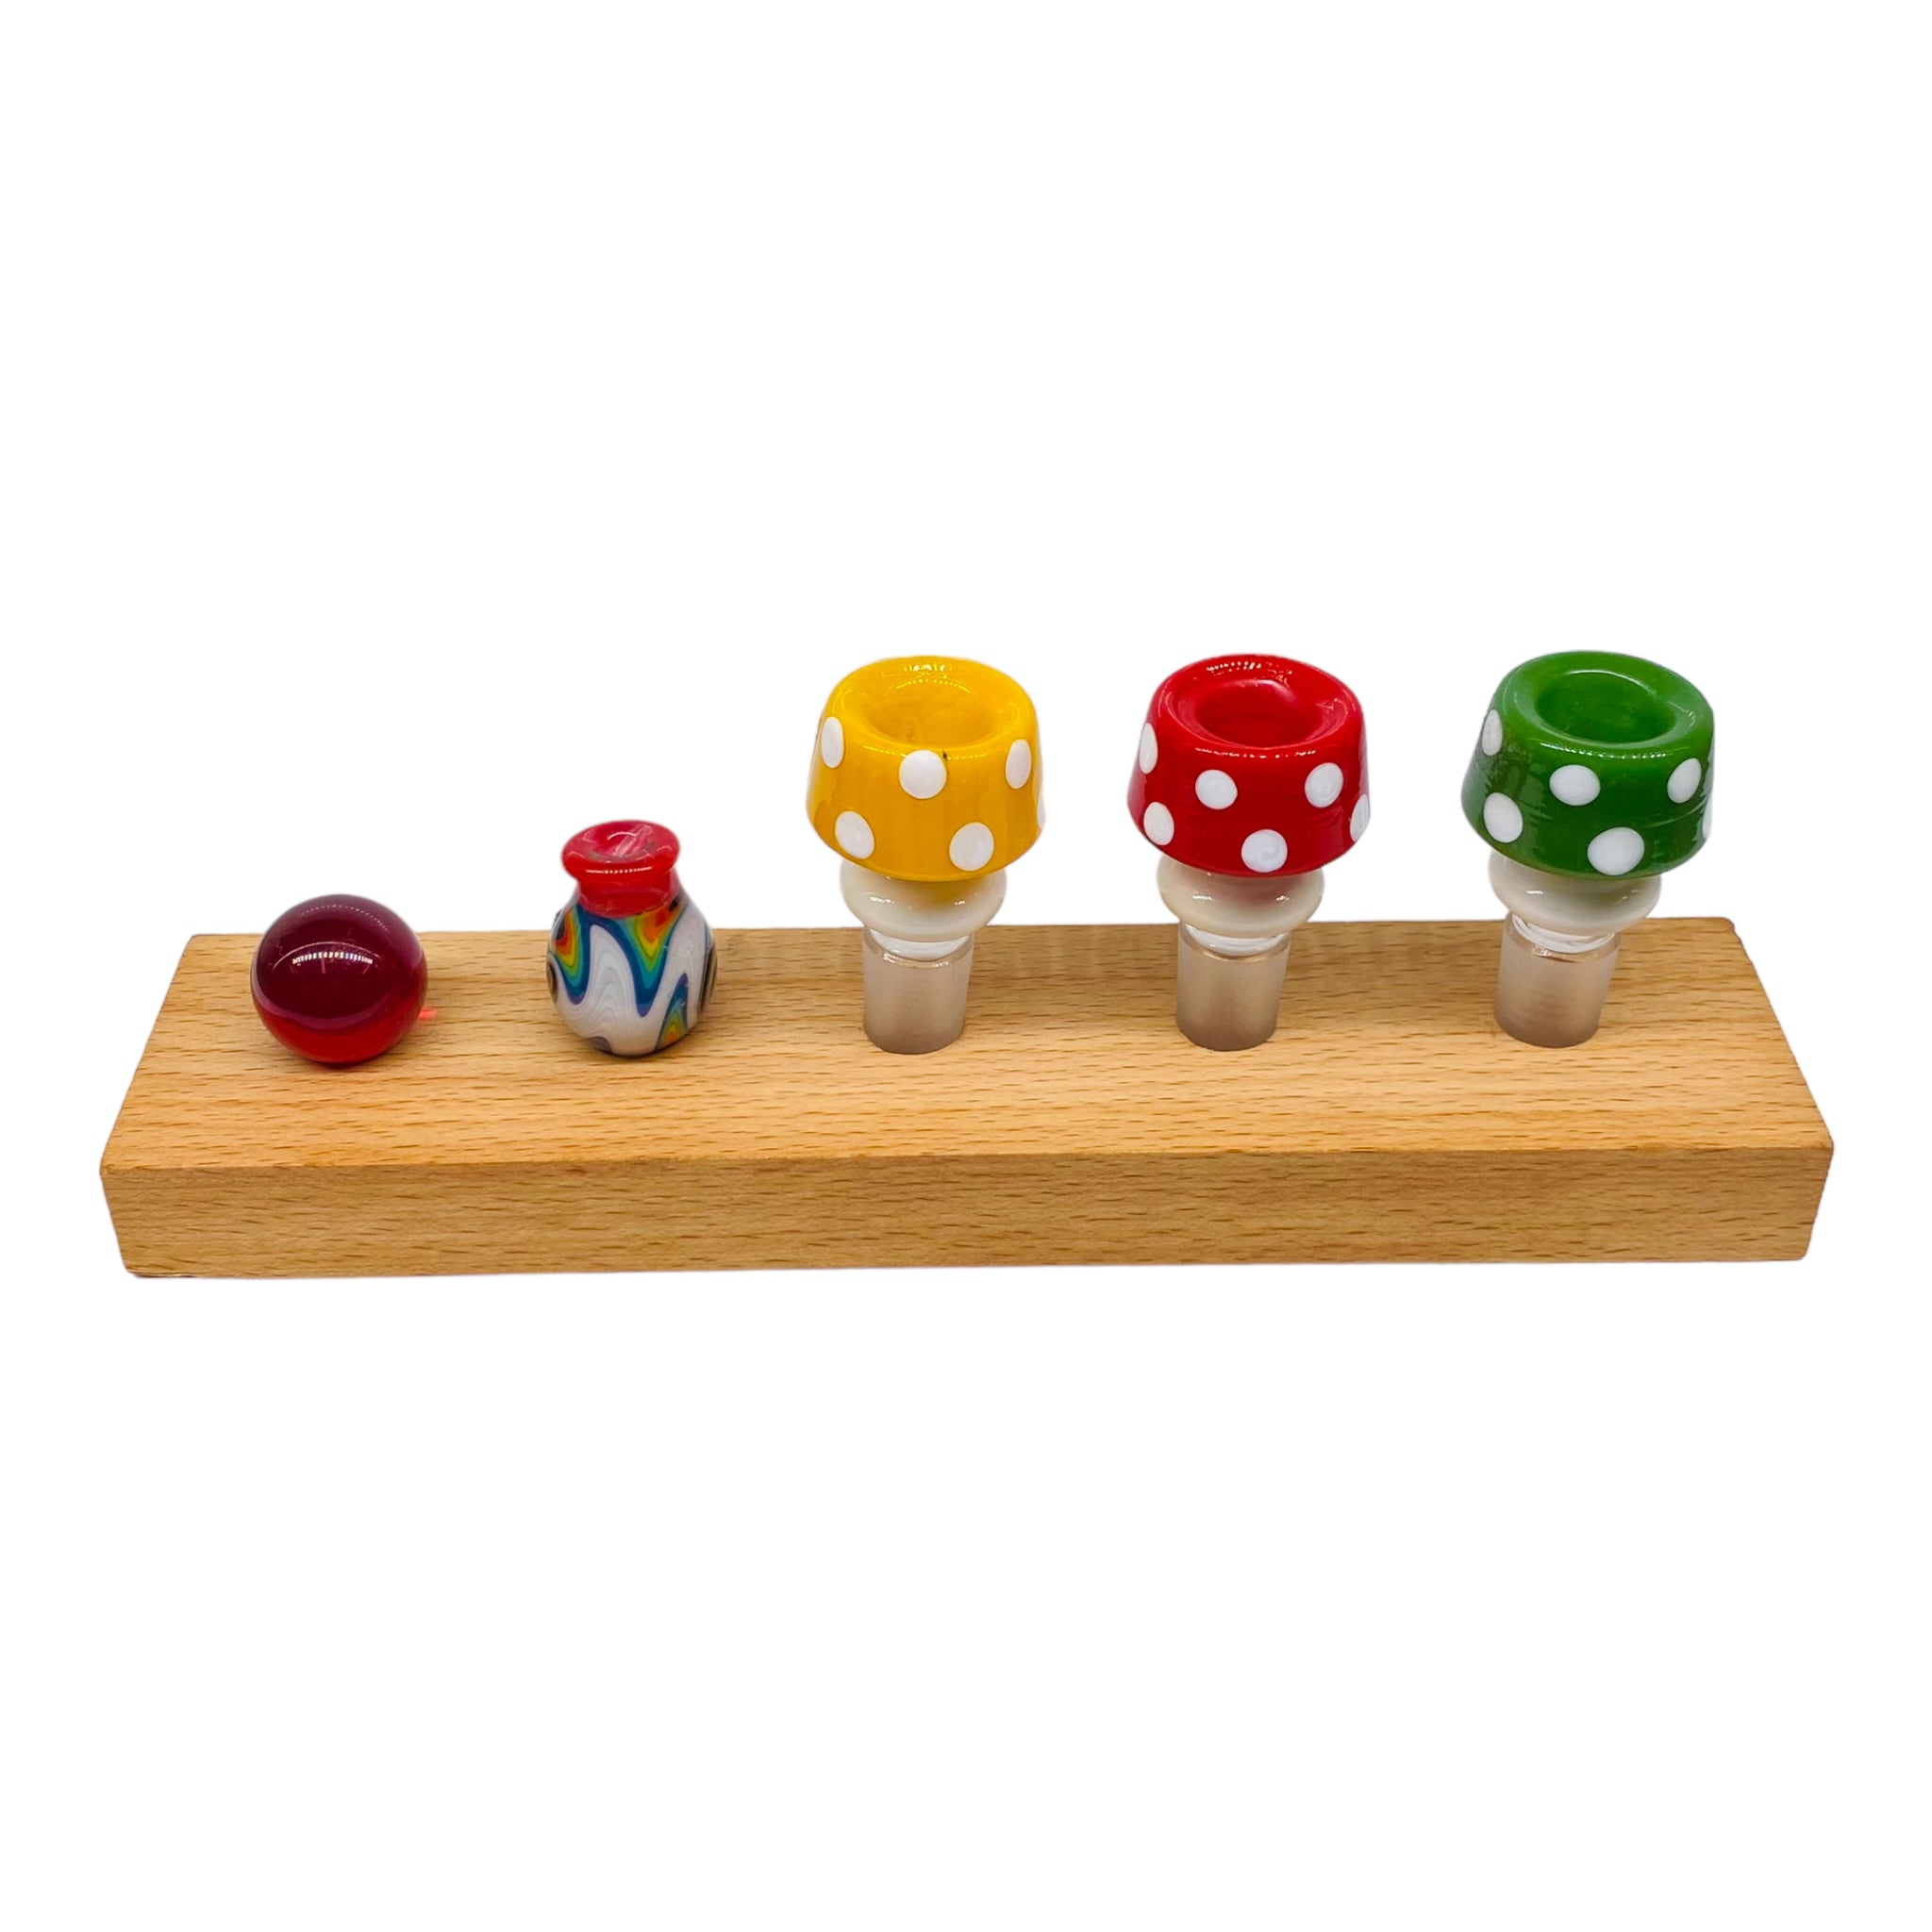 5 Hole Wood Display Stand Holder For 14mm Bong Bowl Pieces Or Quartz Bangers - Cedar Perfect for displaying 14mm Bong Bowl Pieces, Quartz Bangers, Carb Caps, And Marbles.